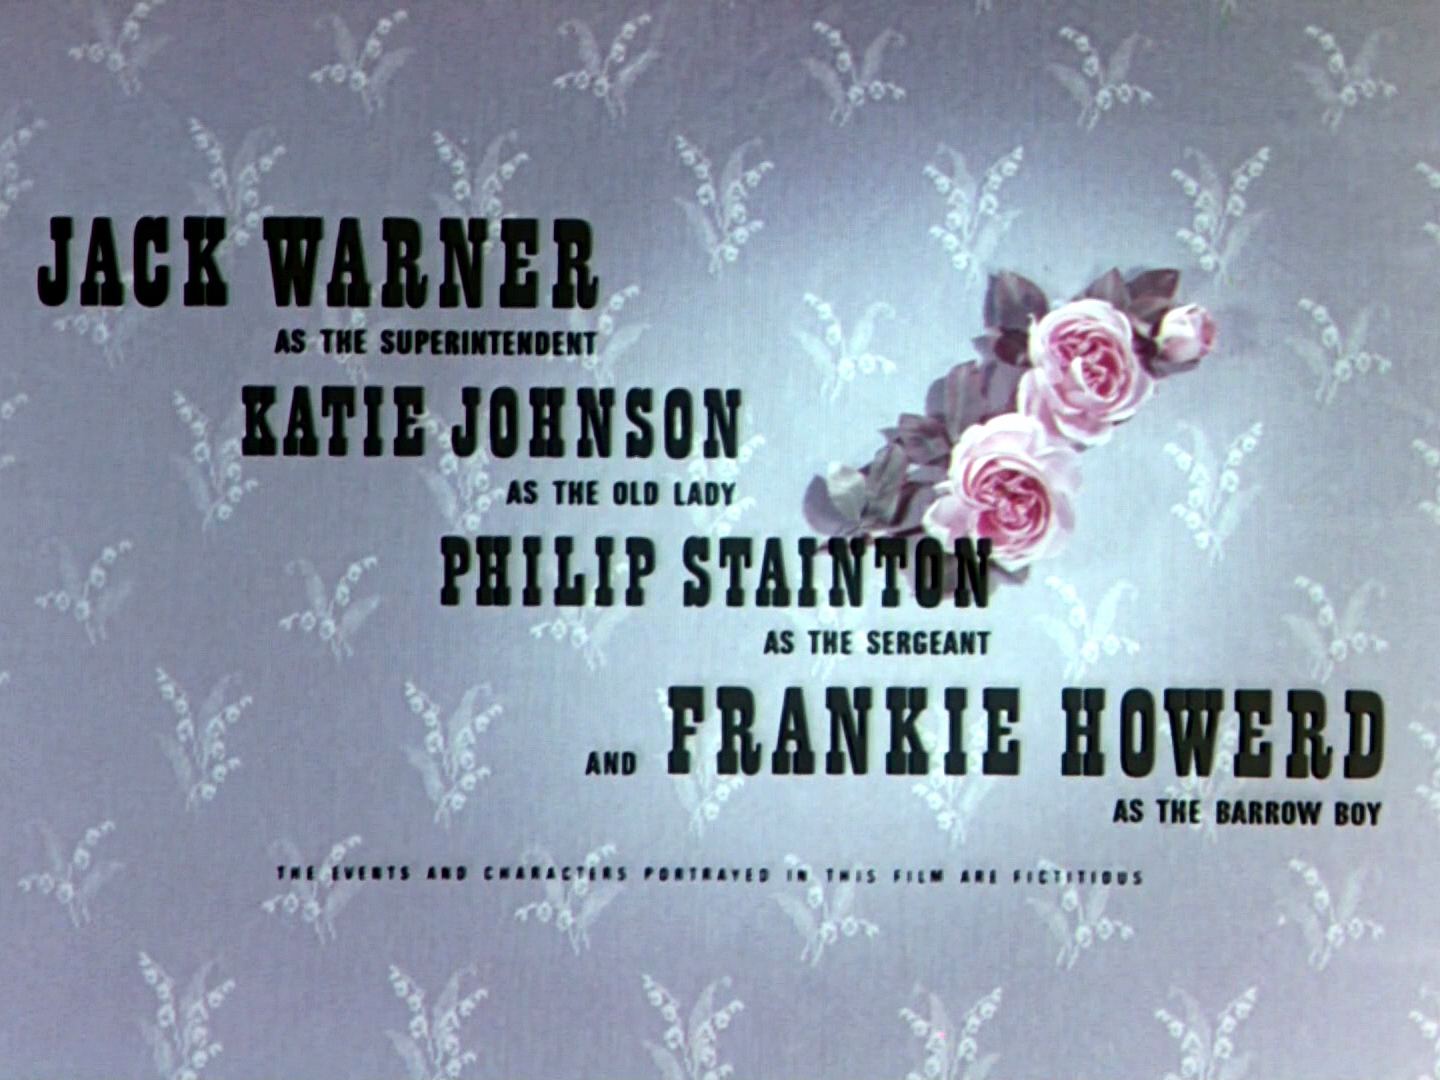 Main title from The Ladykillers (1955) (6).  Jack Warner as the Superintendent Katie Johnson as the Old Lady, Philip Stanton as the Sergeant and Frankie Howerd as the Barrow Boy.  The vents and characters portrayed in this film are fictitious